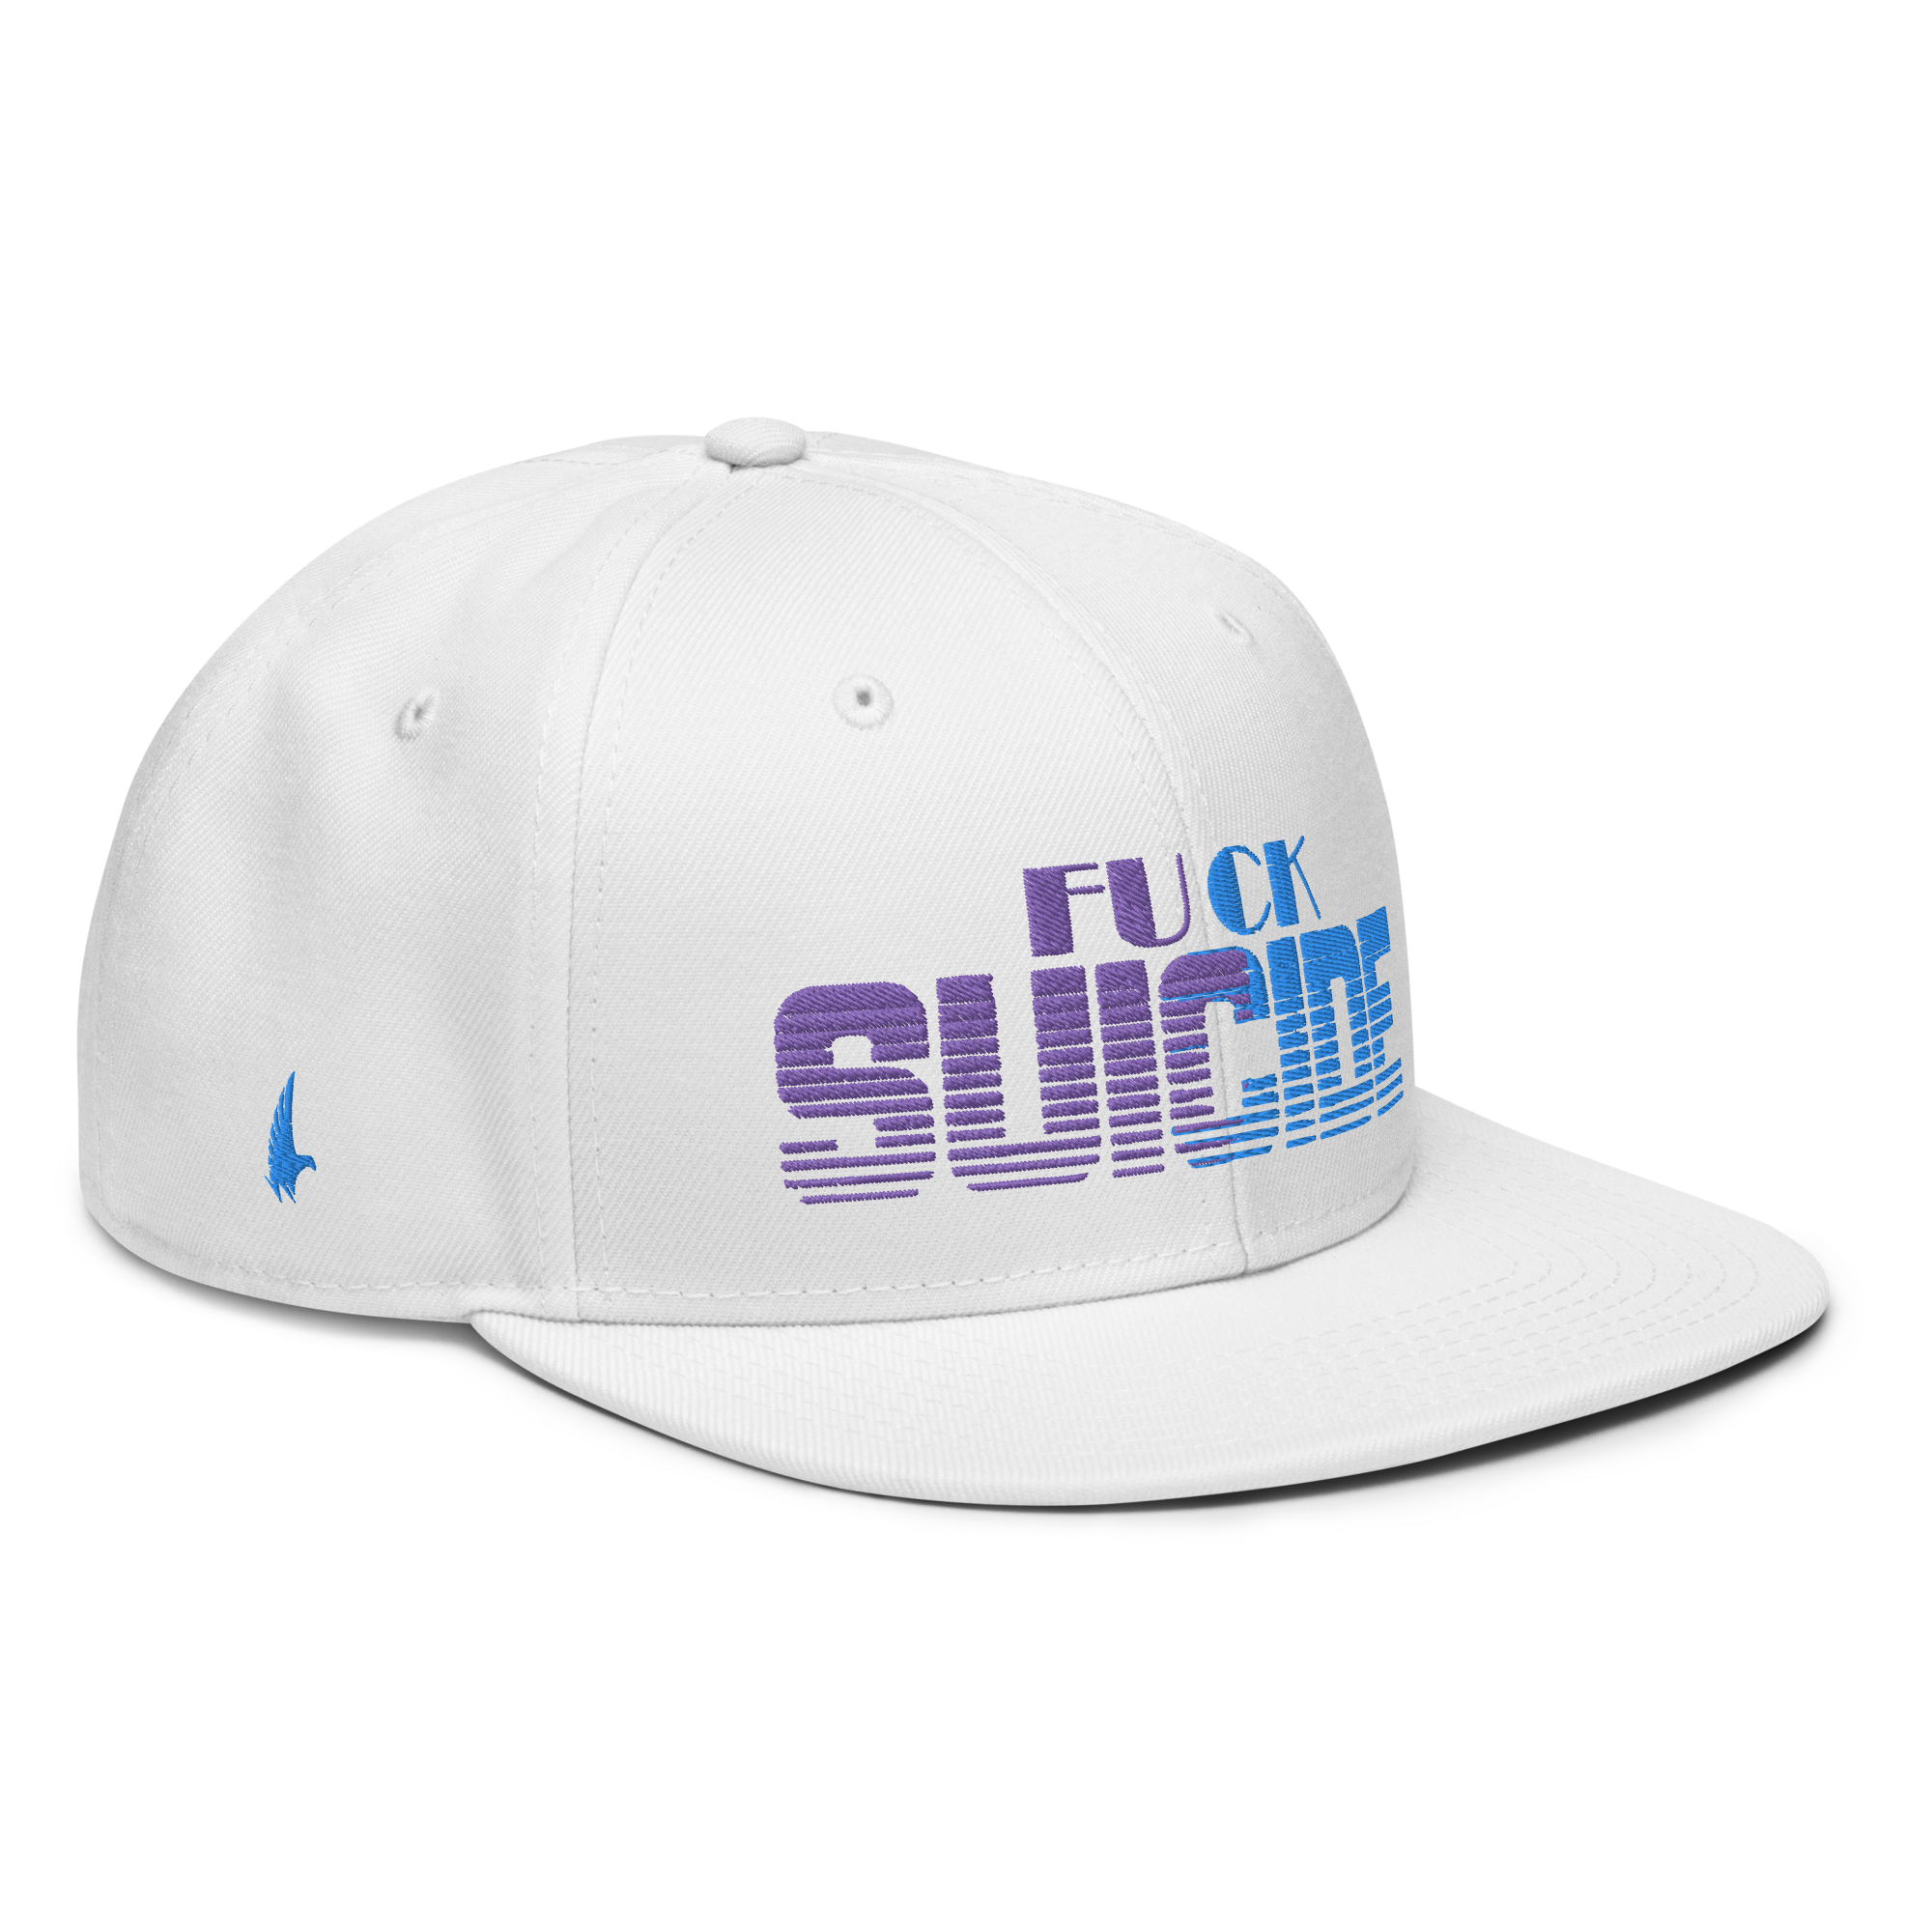 Fk Suicide Snapback Hat - White Adorn OS - Loyalty Vibes